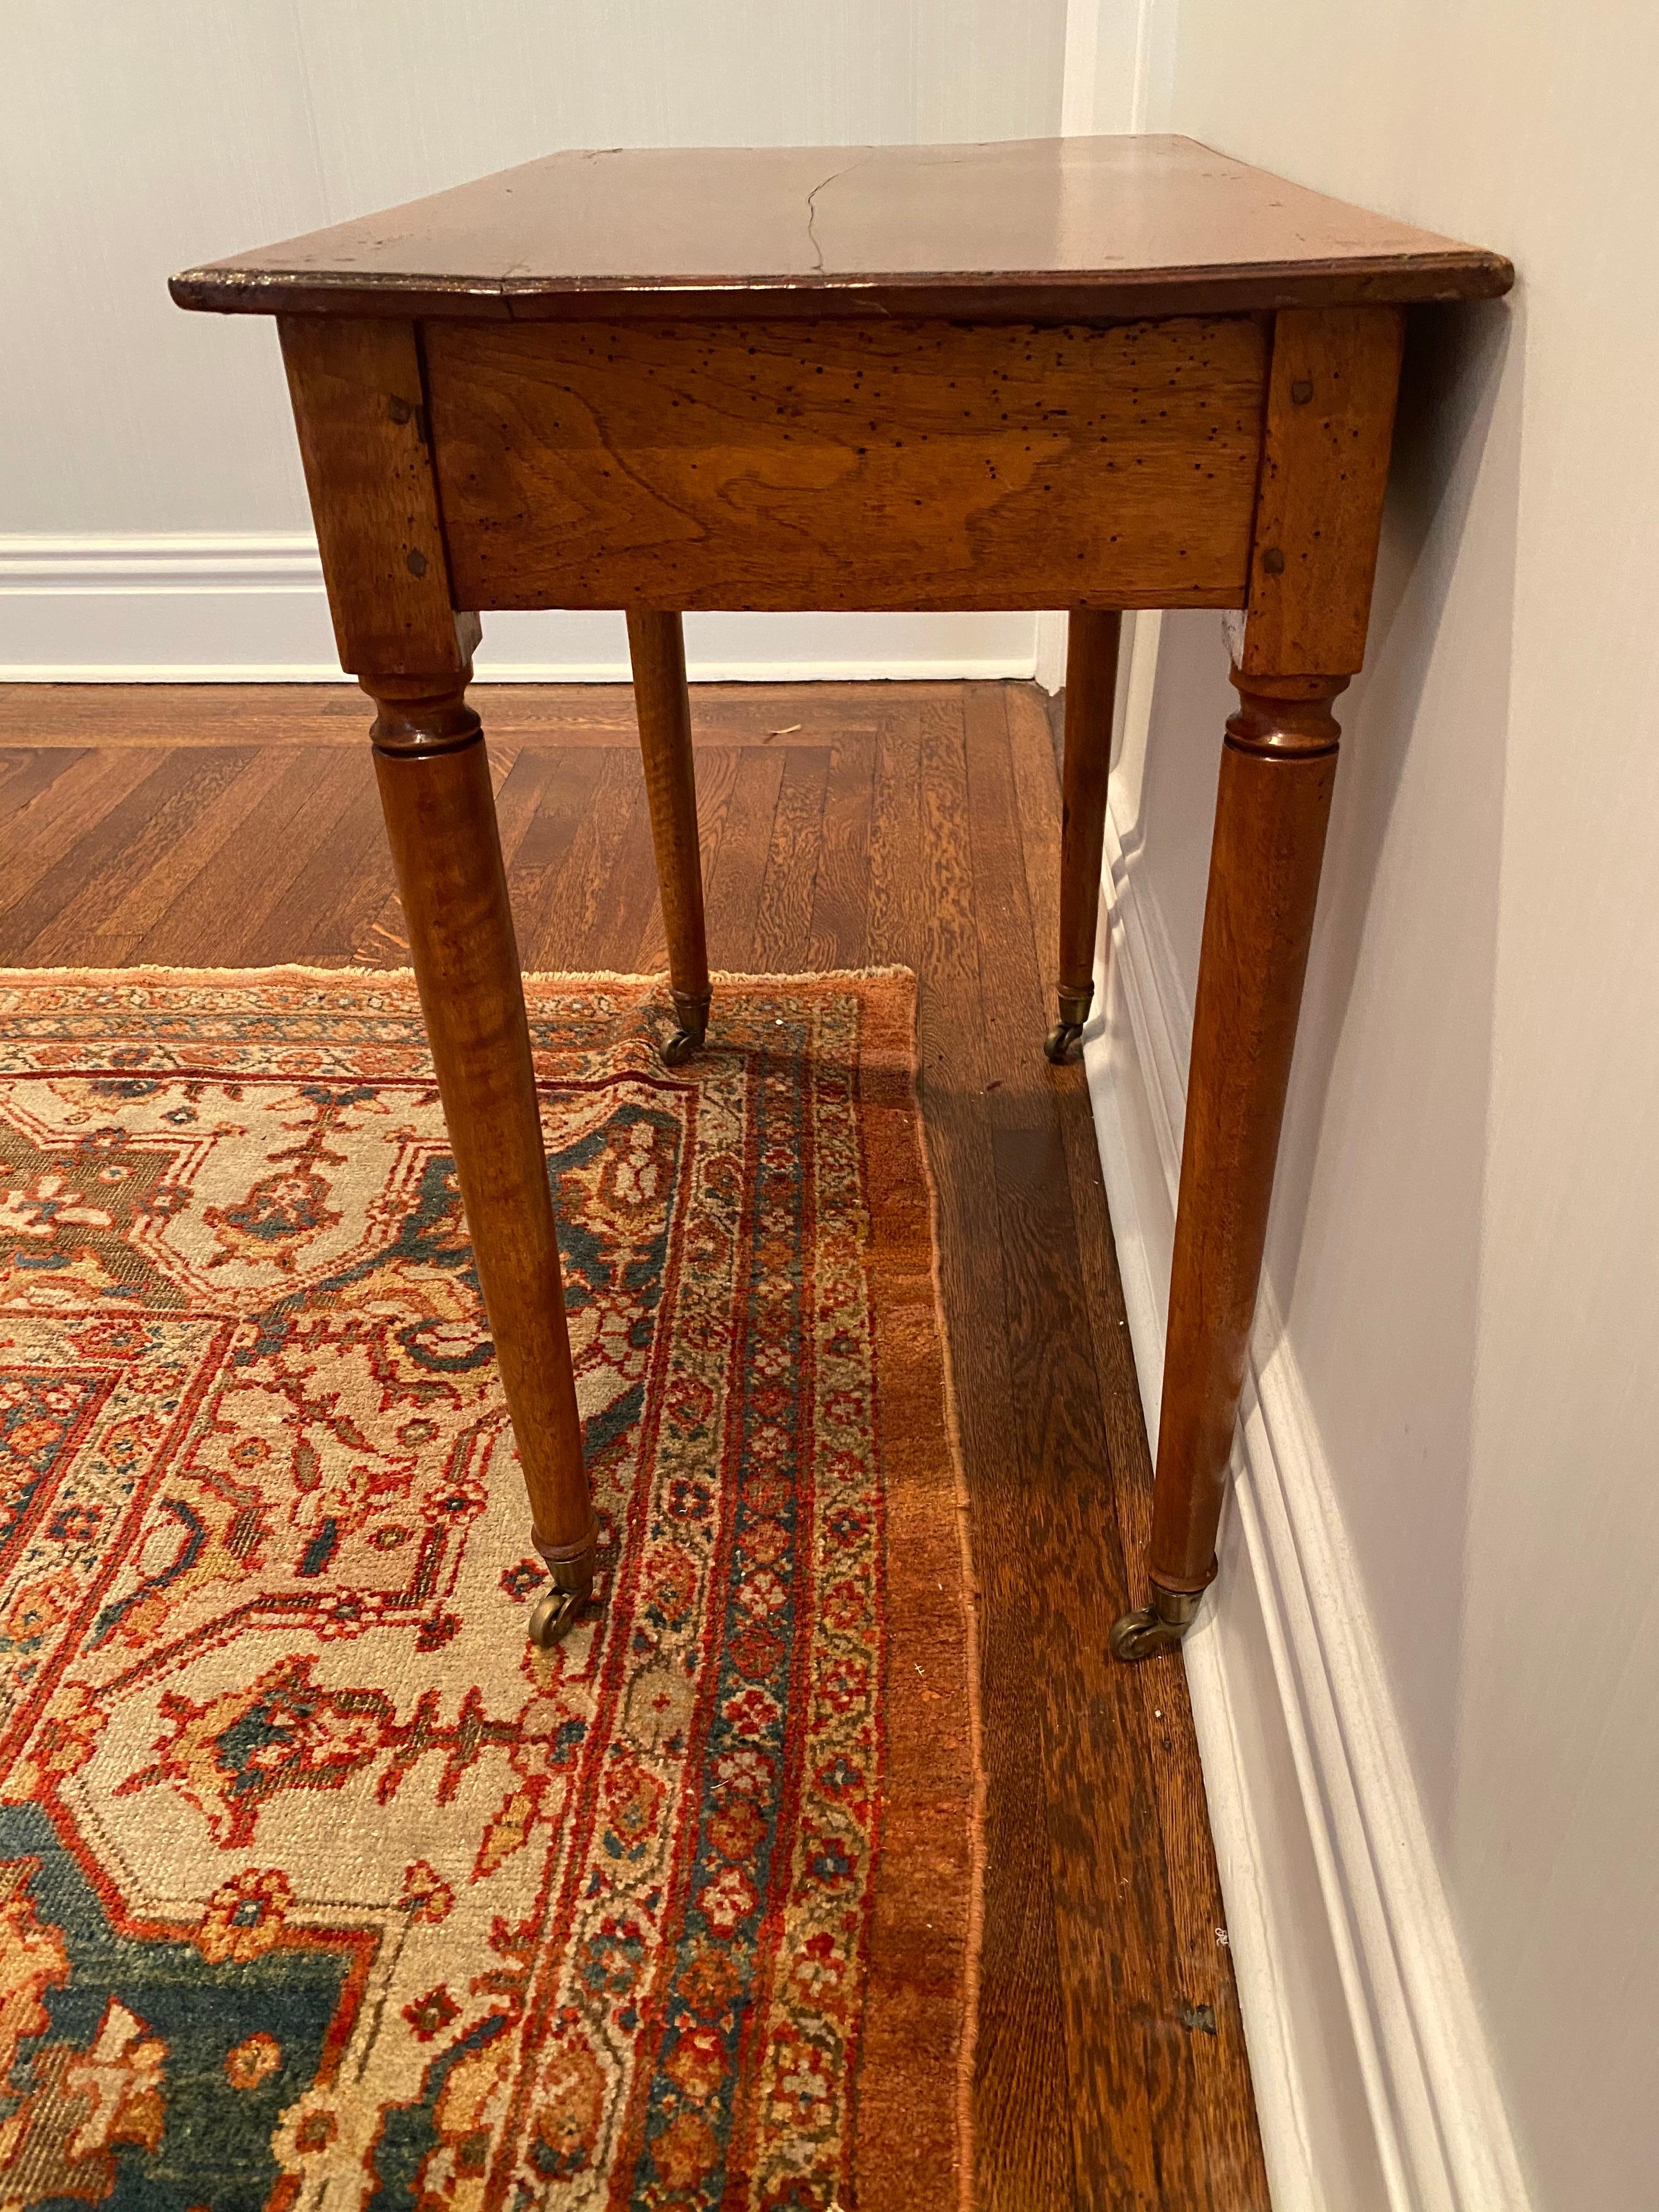 American mahogany single drawer side table
Rounded tapered legs on casters. 
Split to wood on top, in good stabile condition. 

Measures: 30” W x 17.5” D x 28” H 
Drawer 13” D x 23” x 2” D 
Floor clearing 23.5”.